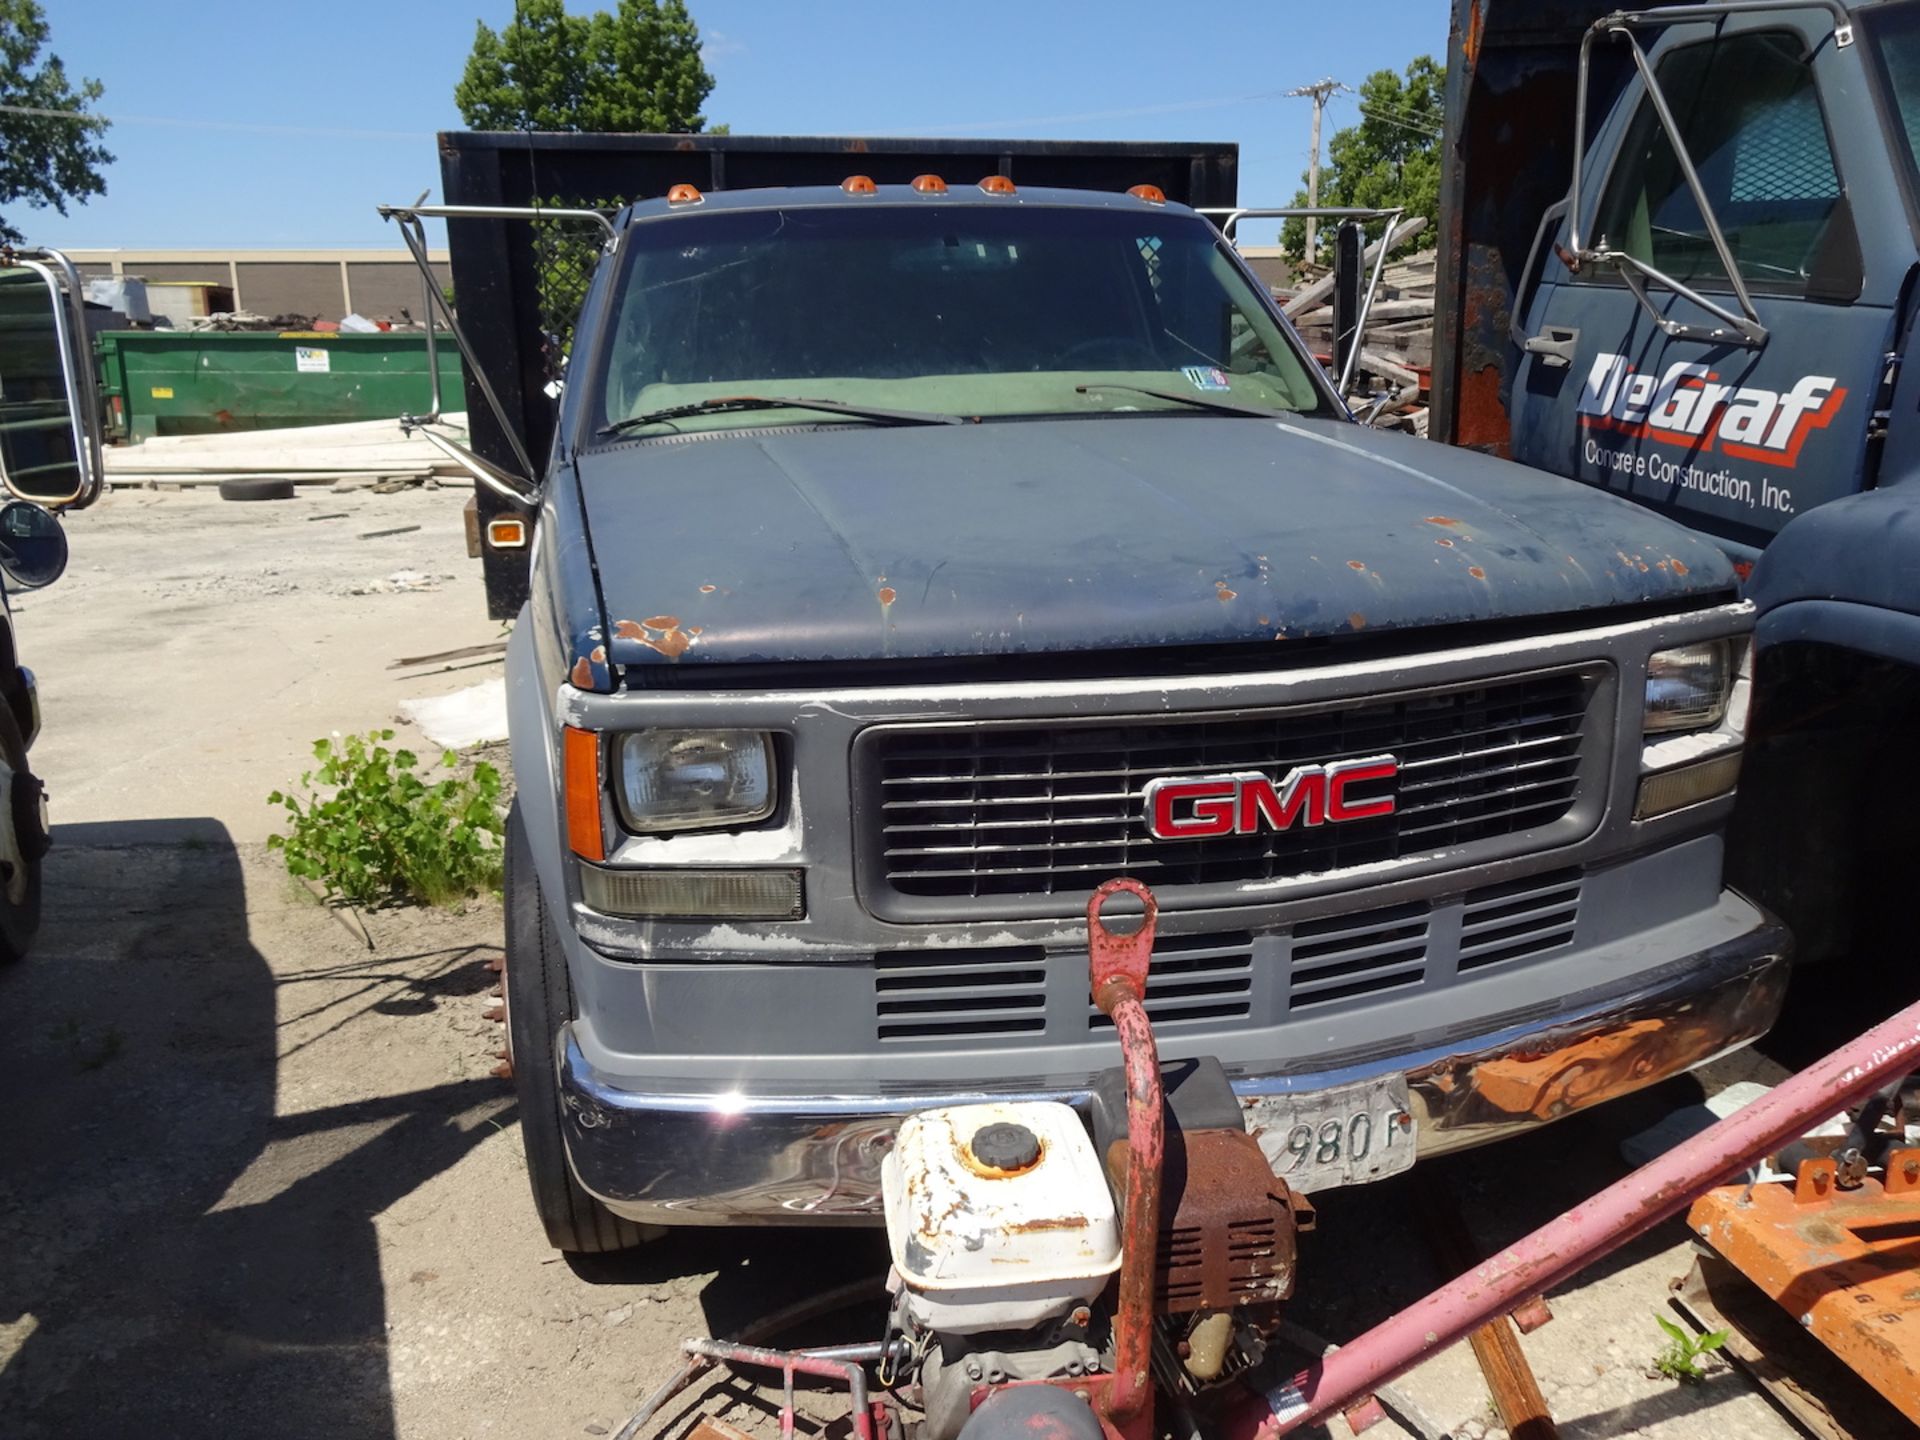 2000 GMC 3500 HD 14' FLAT BED, DUALLY, AUTOMATIC, AIR, BLUE, VIN: GDKC34FOYF468184, AS IS, CONDITION